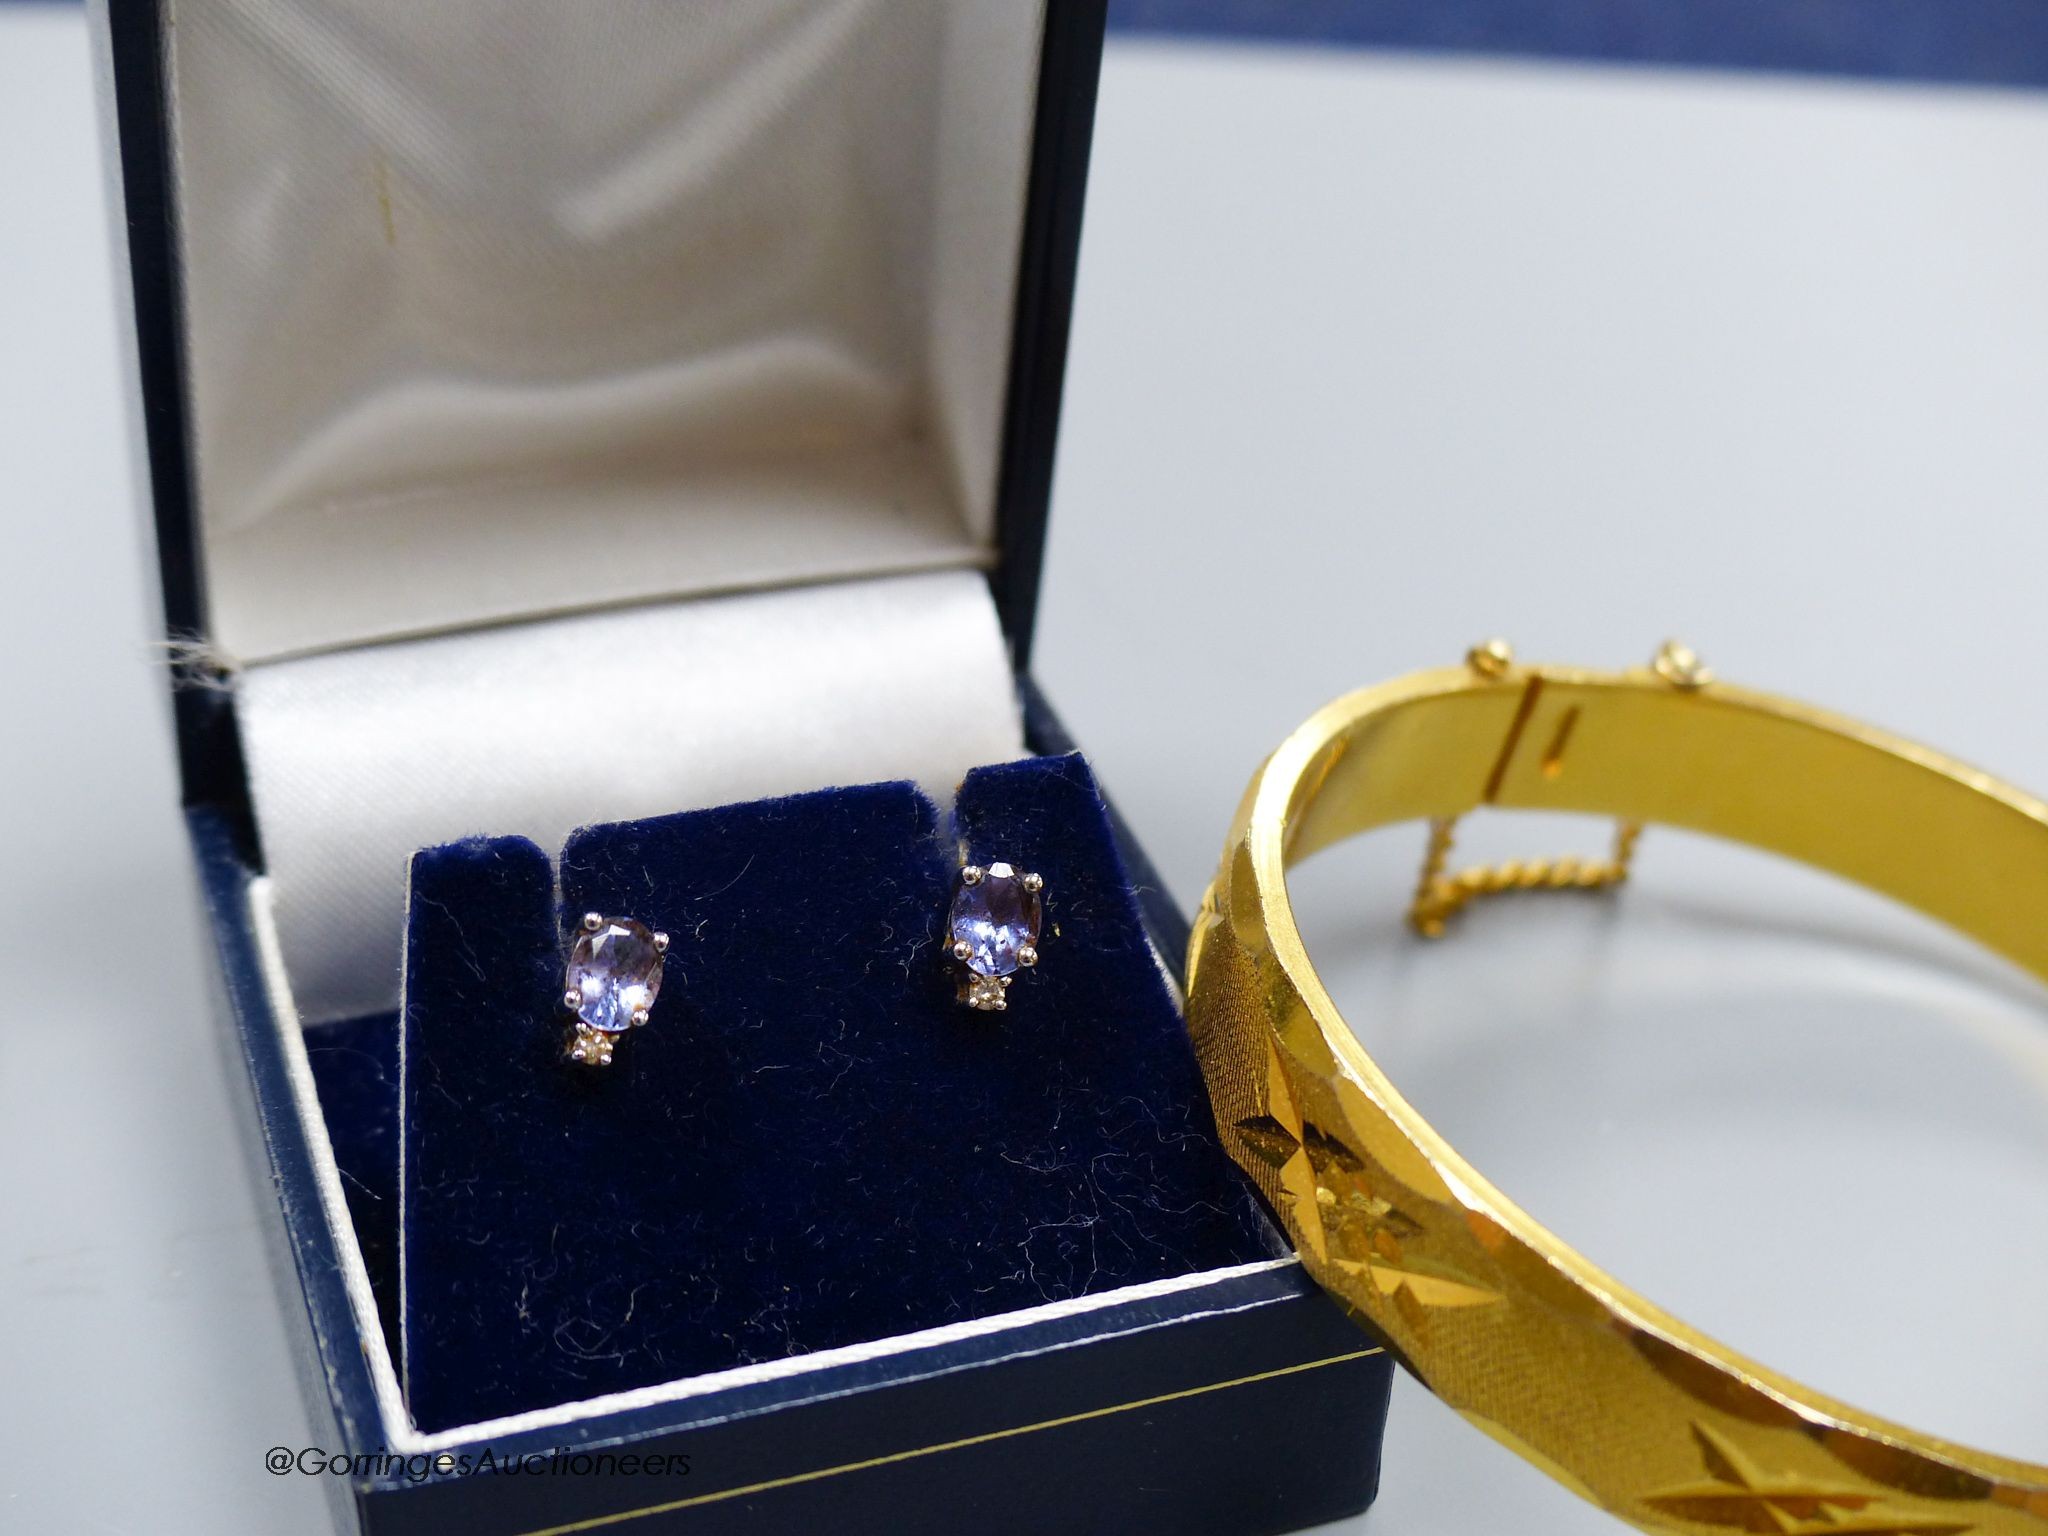 An 18K engraved gold filled hinged bangle and a pair of 14K white metal stud earrings